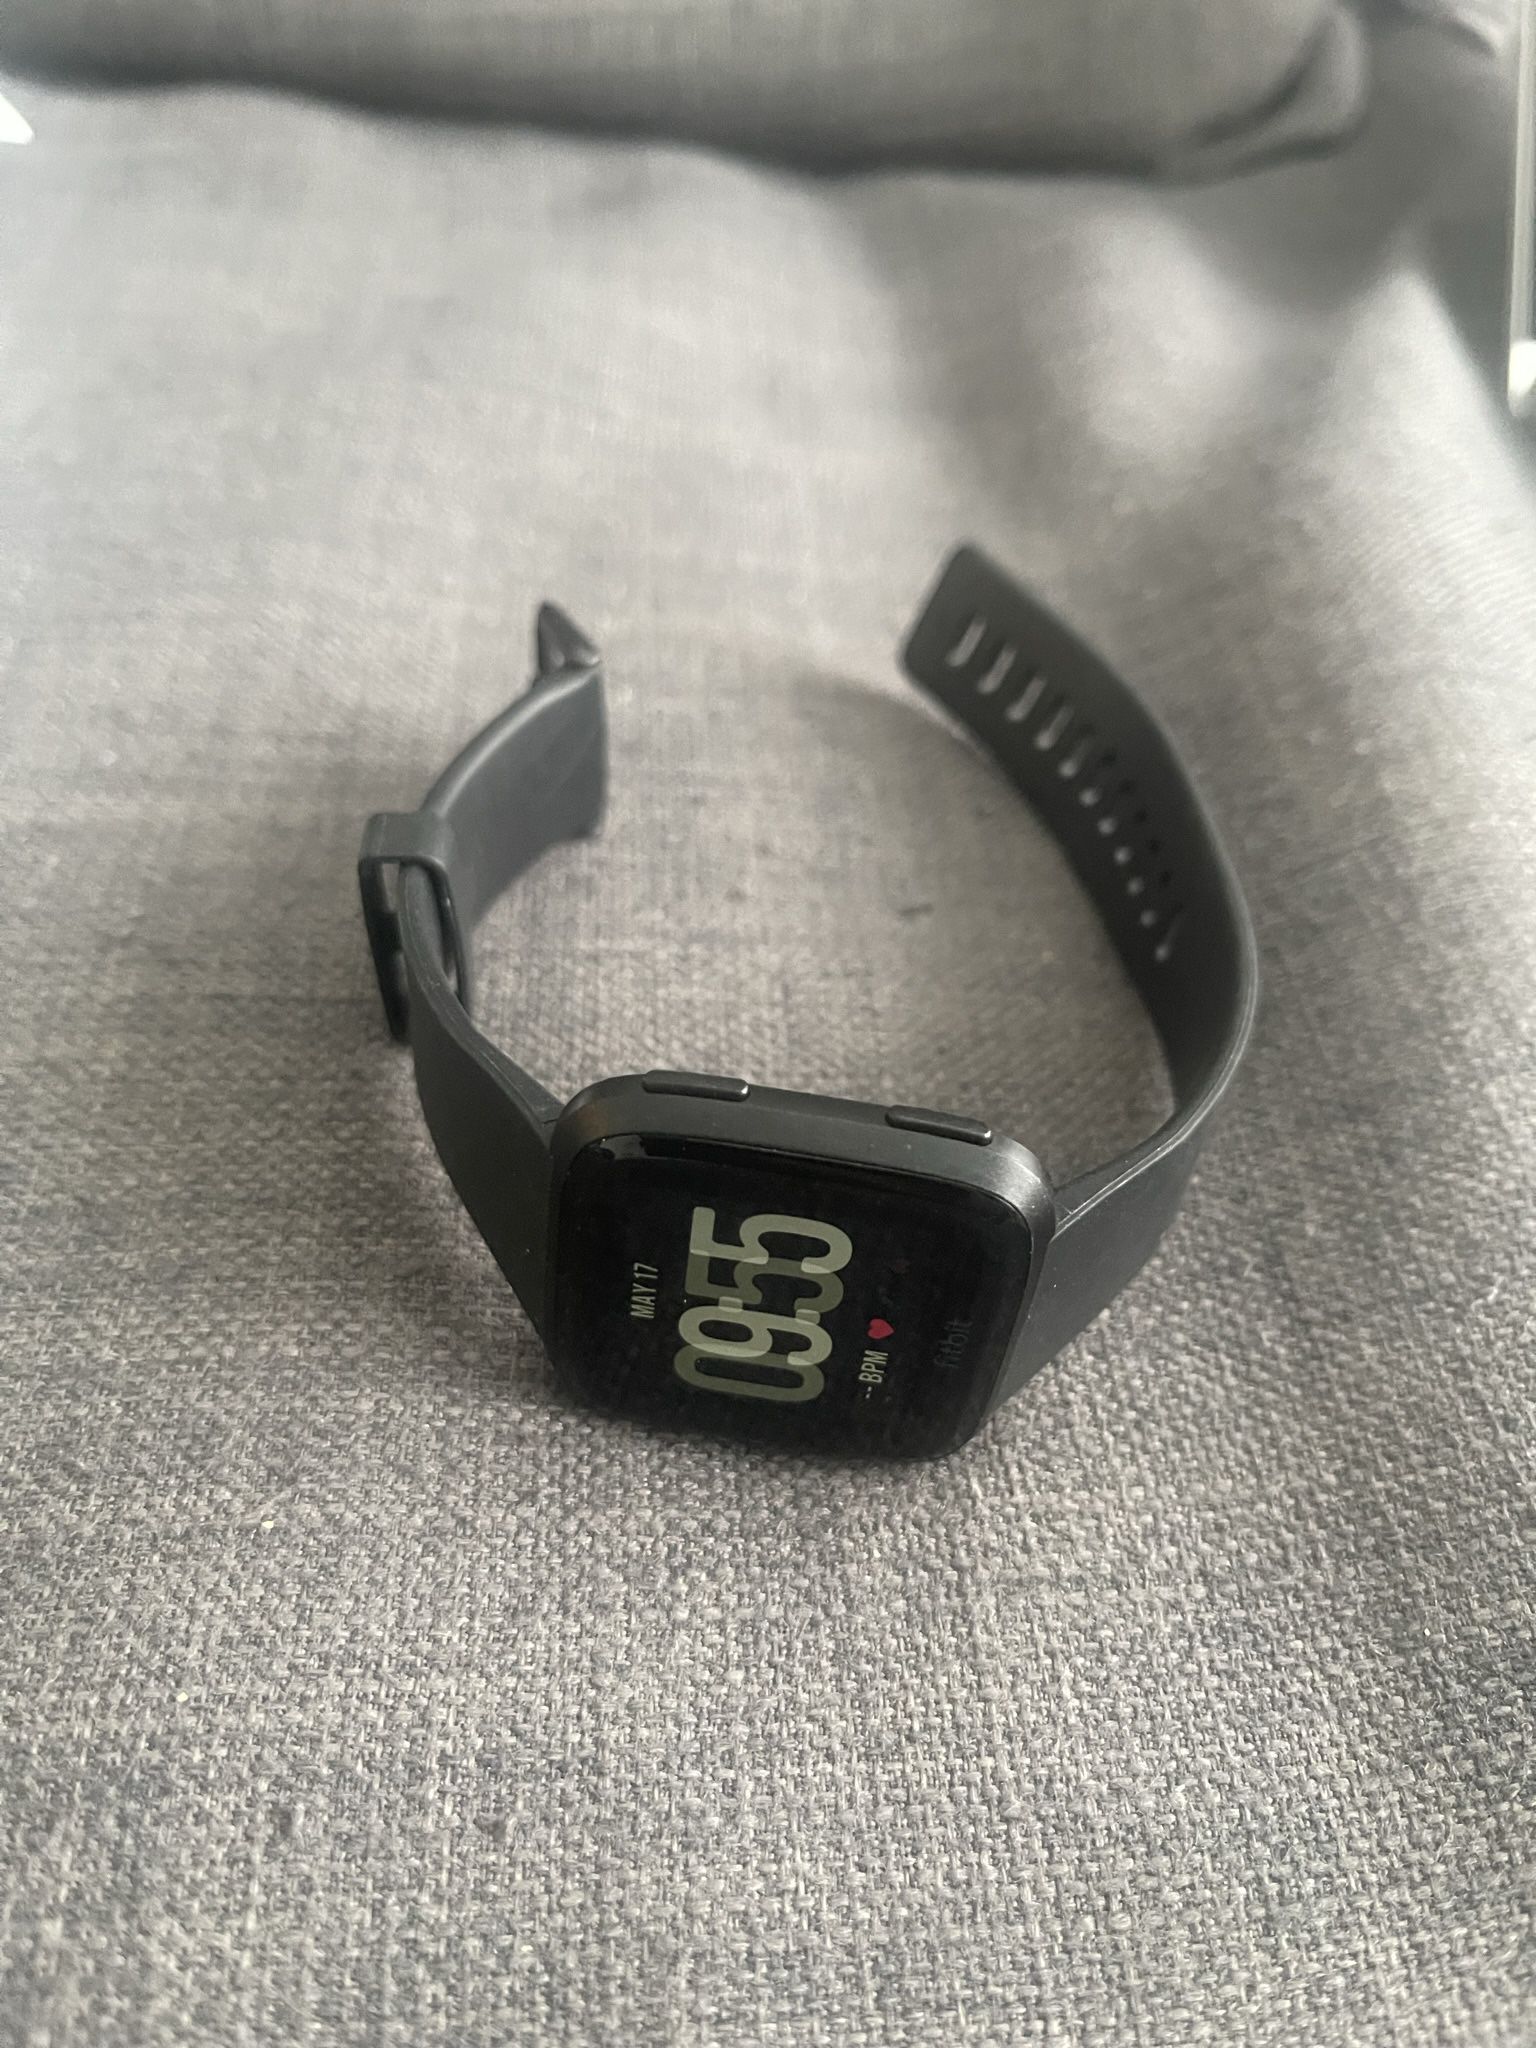 Fitbit Versa for Sale. 